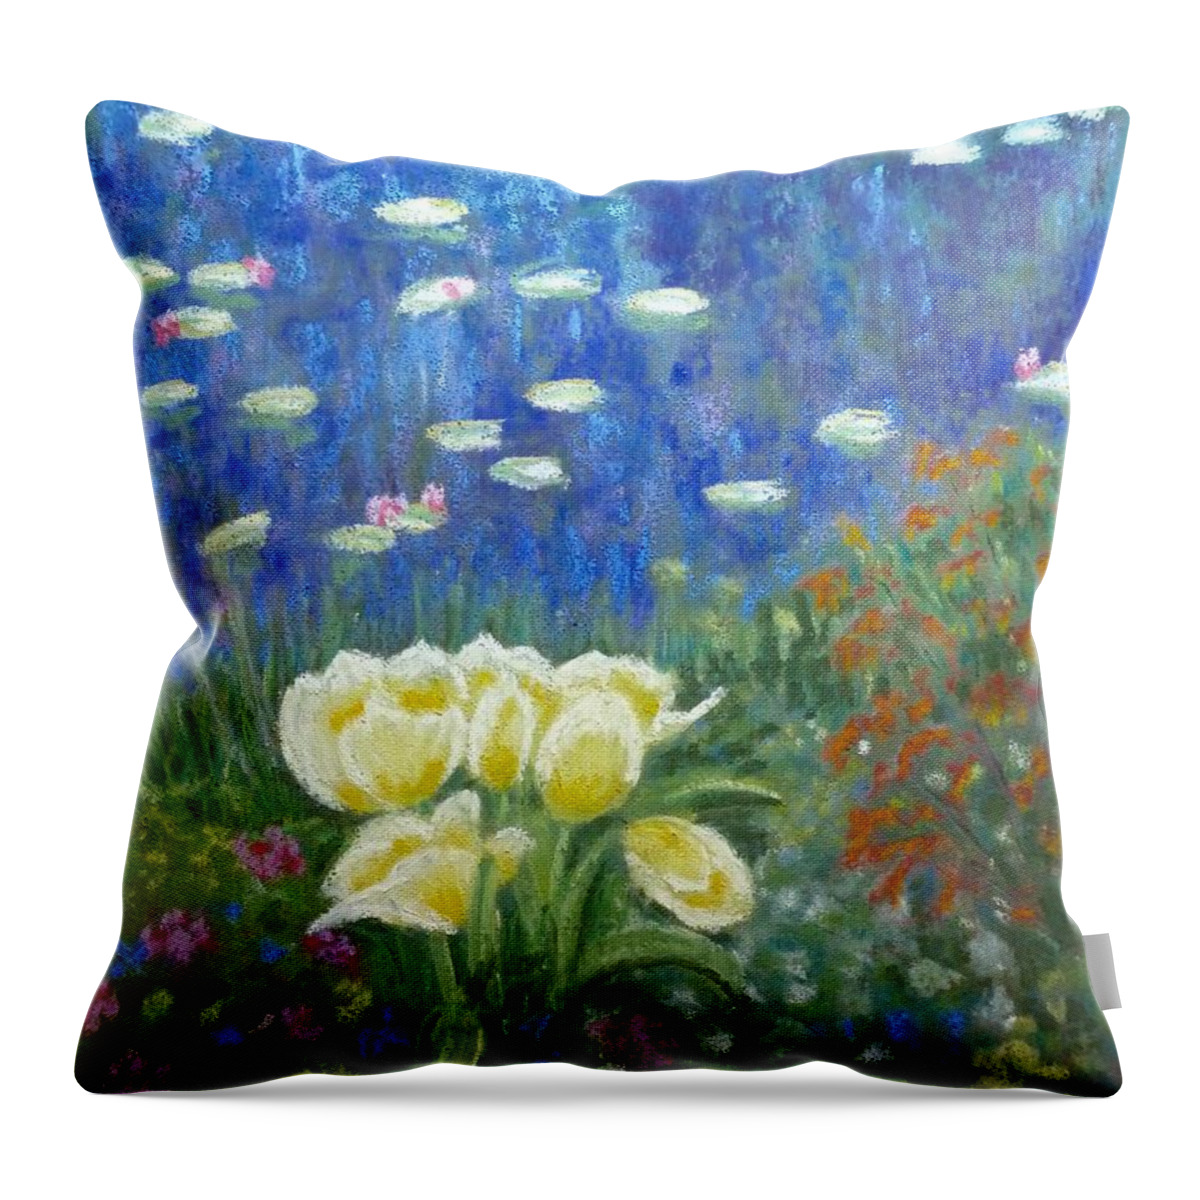 Monet Throw Pillow featuring the painting A Monet Moment by Lynda Evans